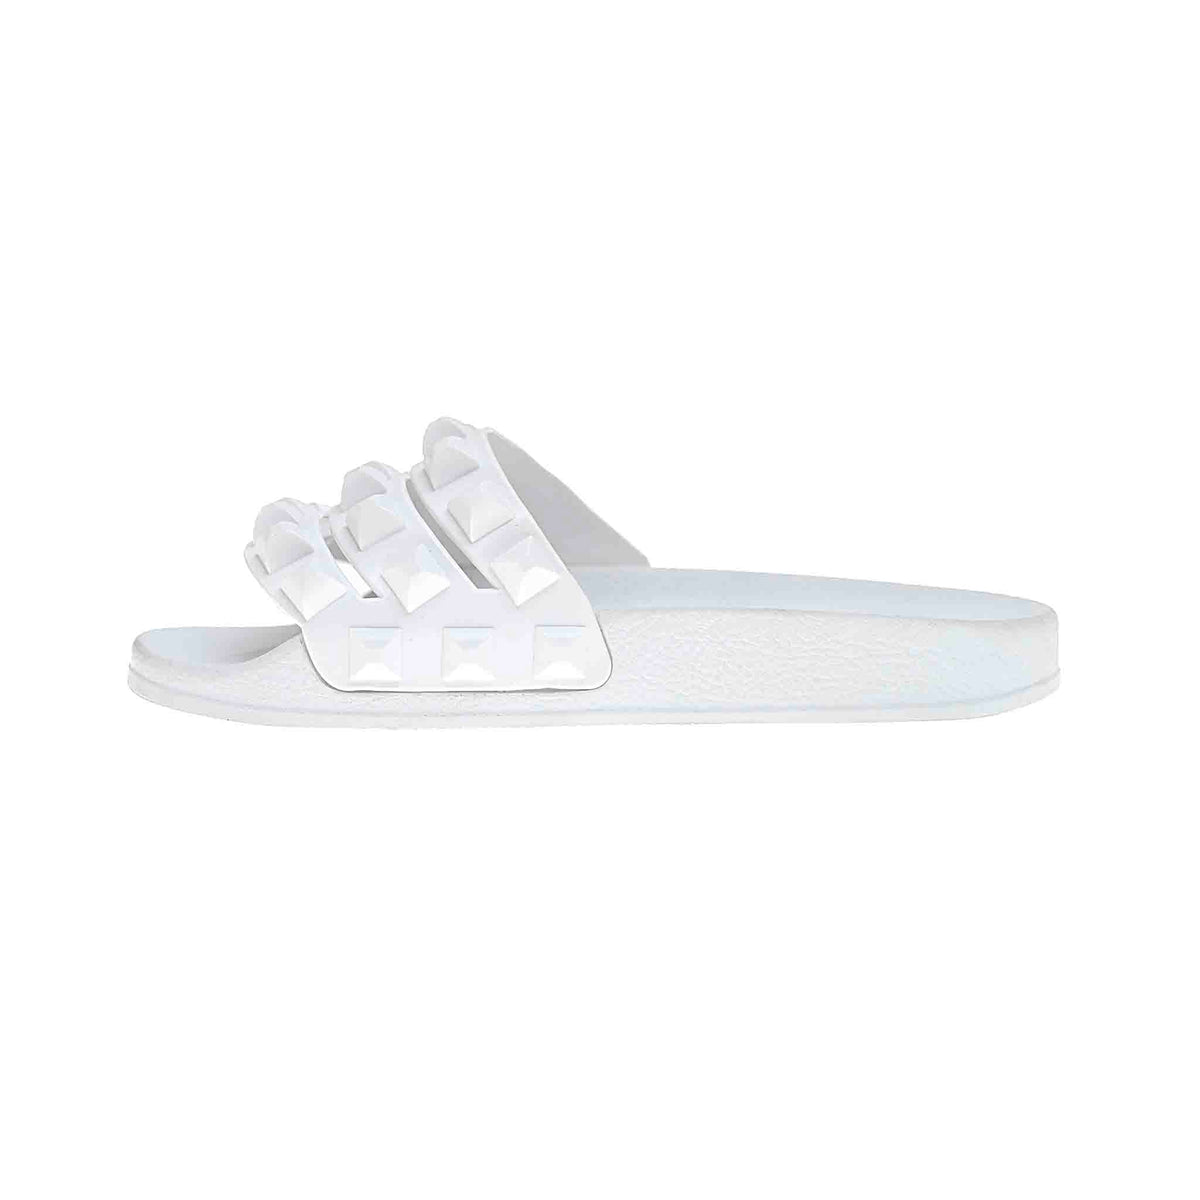 White Carmensita Platform Slides Sandals, Jelly sandals are all about comfort and ease of use from carmensol